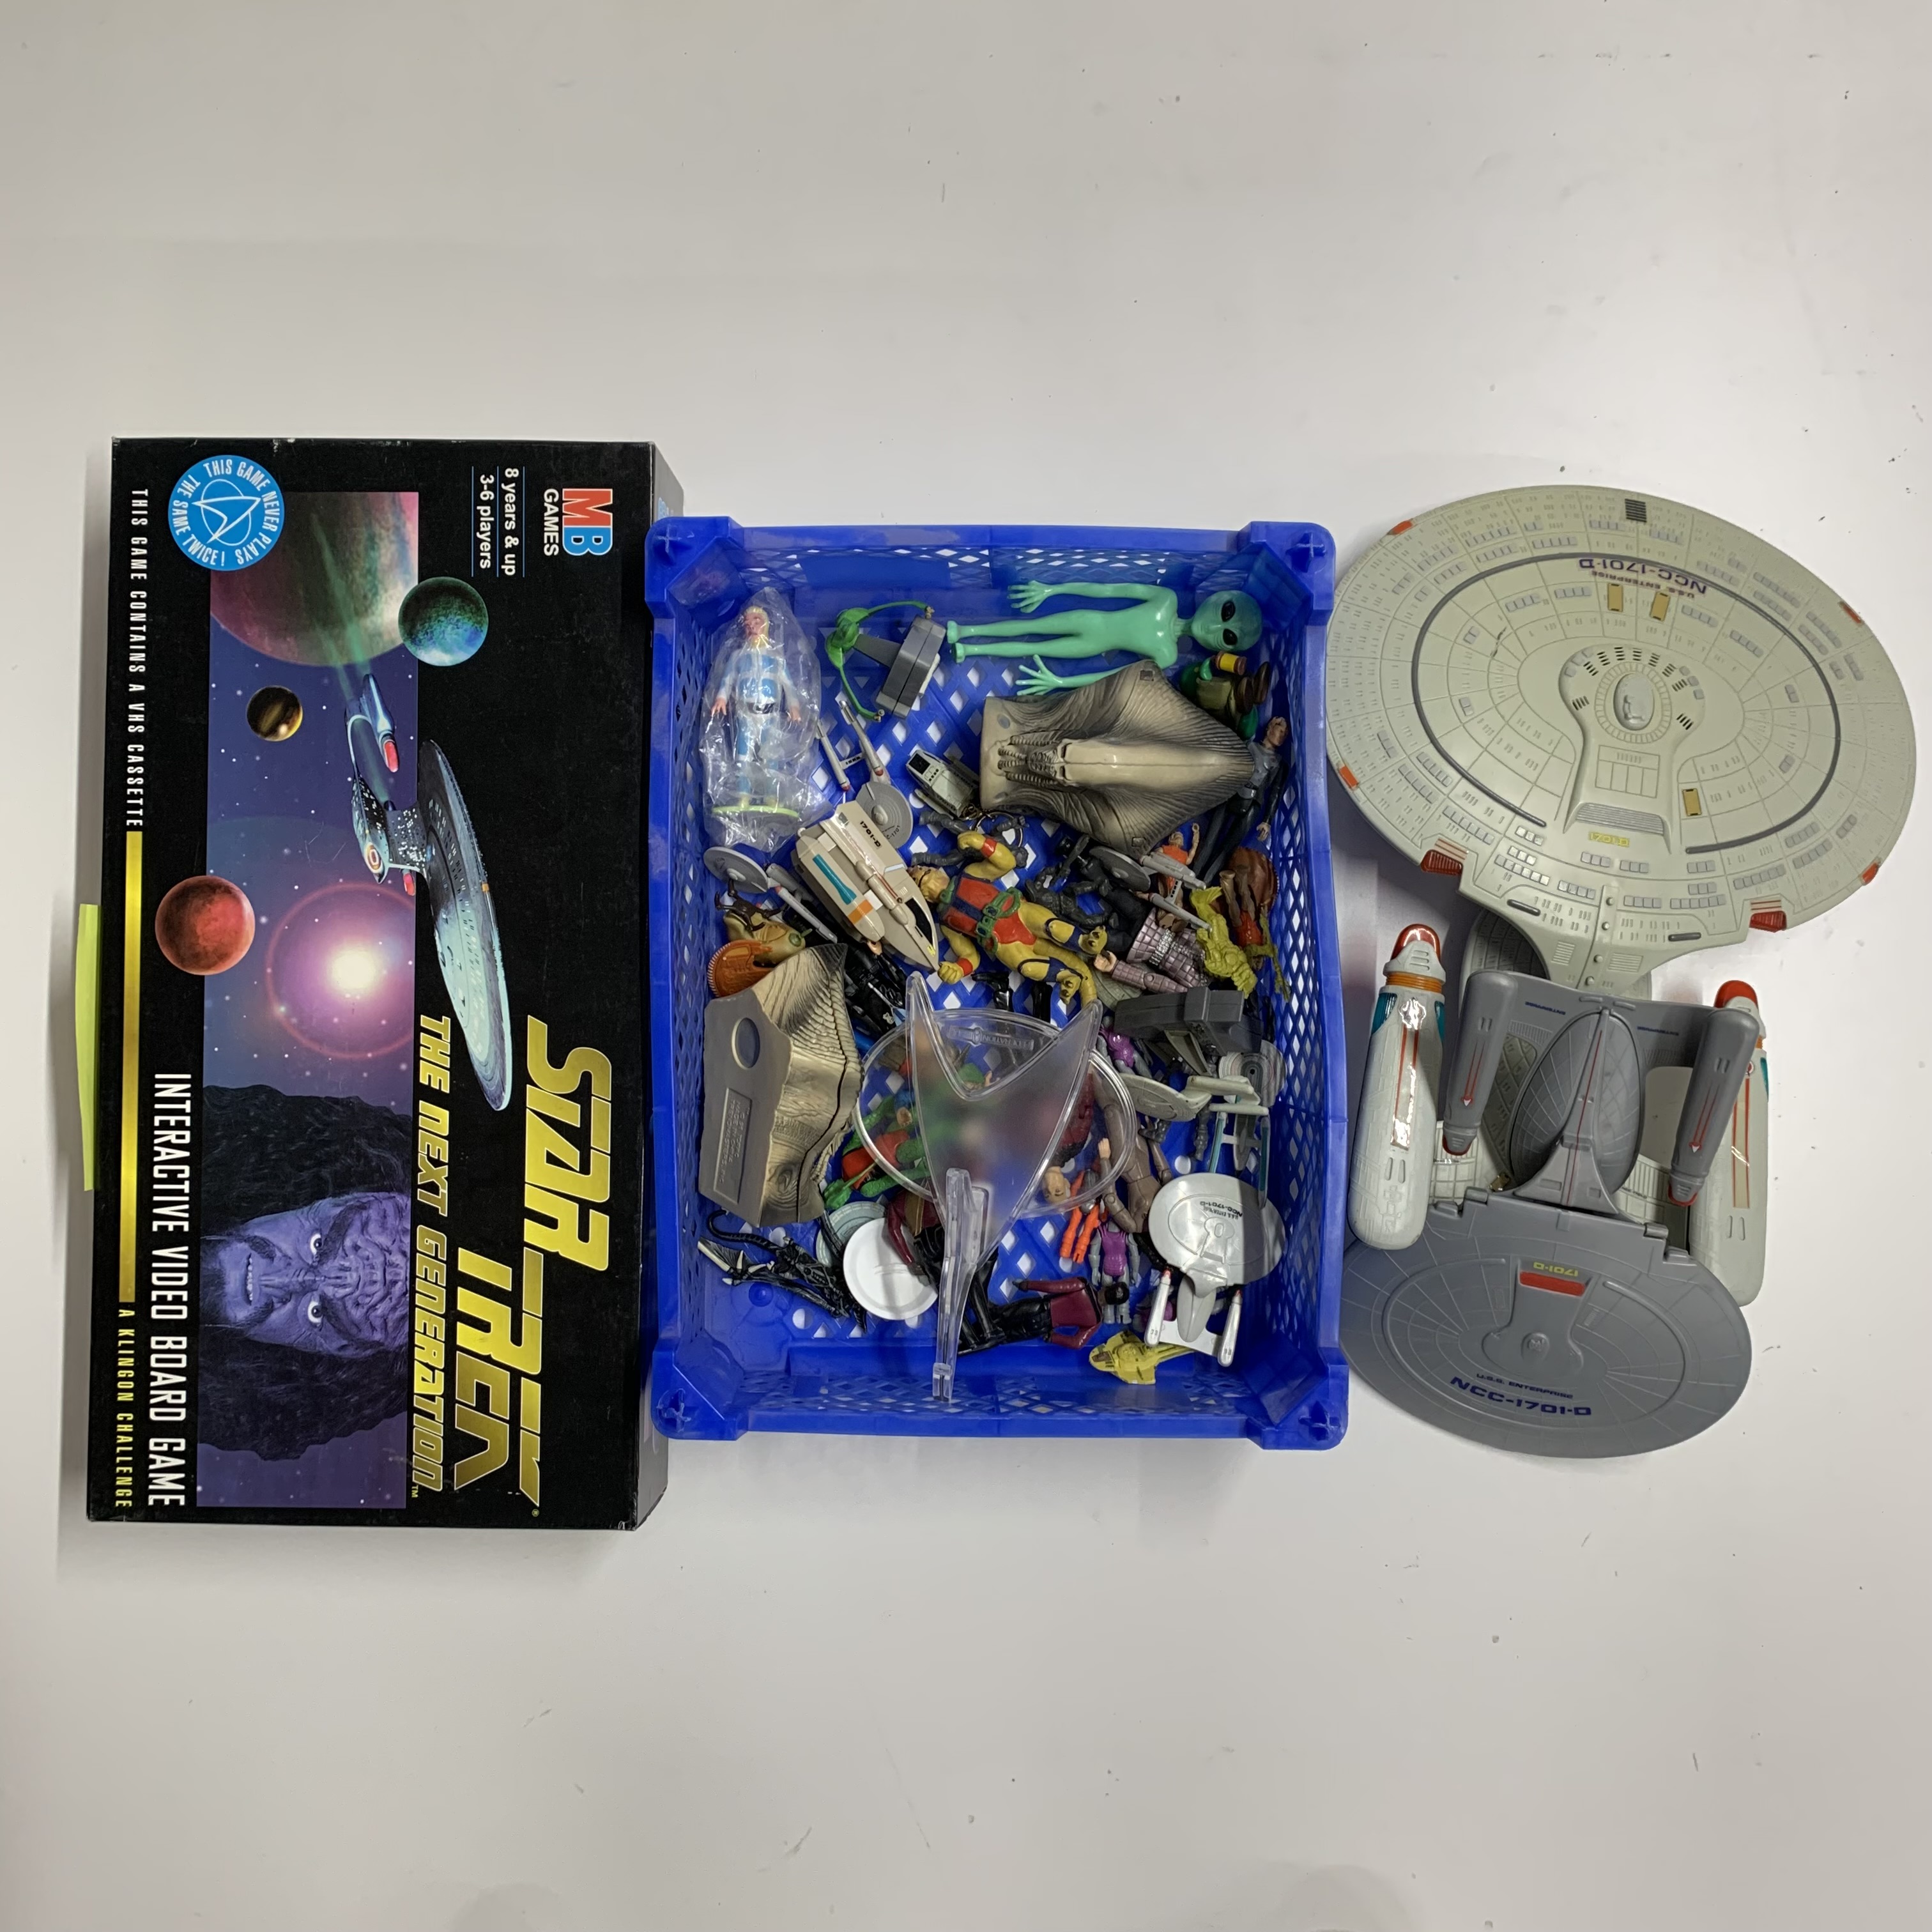 A quantity of various Star Trek toys including an interactive board game etc. - Image 2 of 2